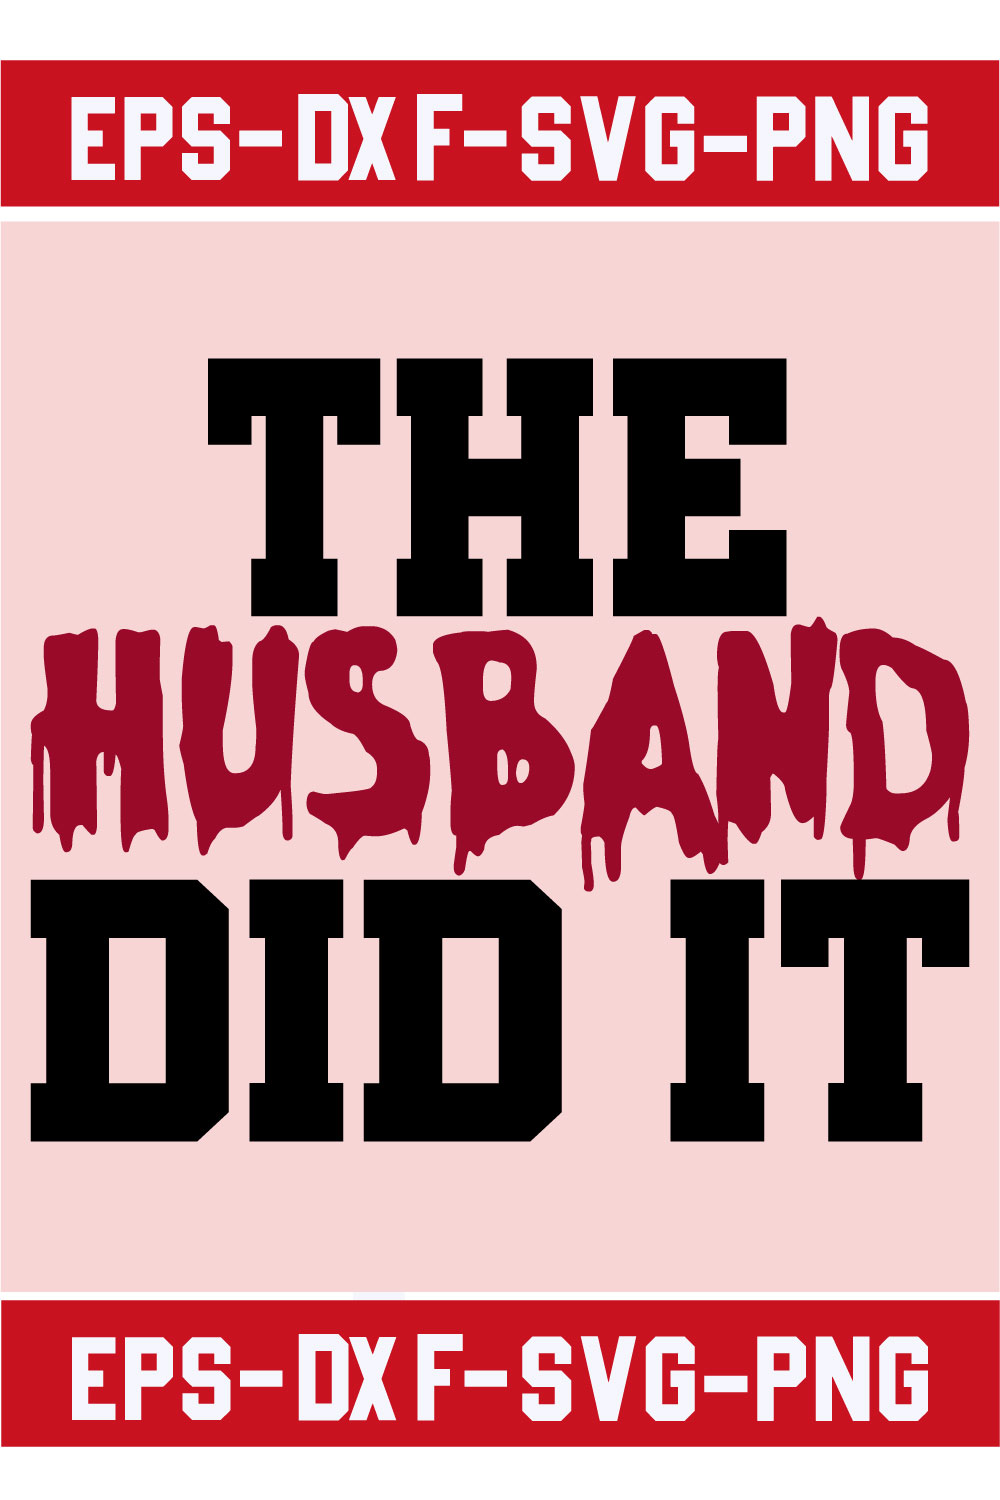 The Husband did it pinterest preview image.